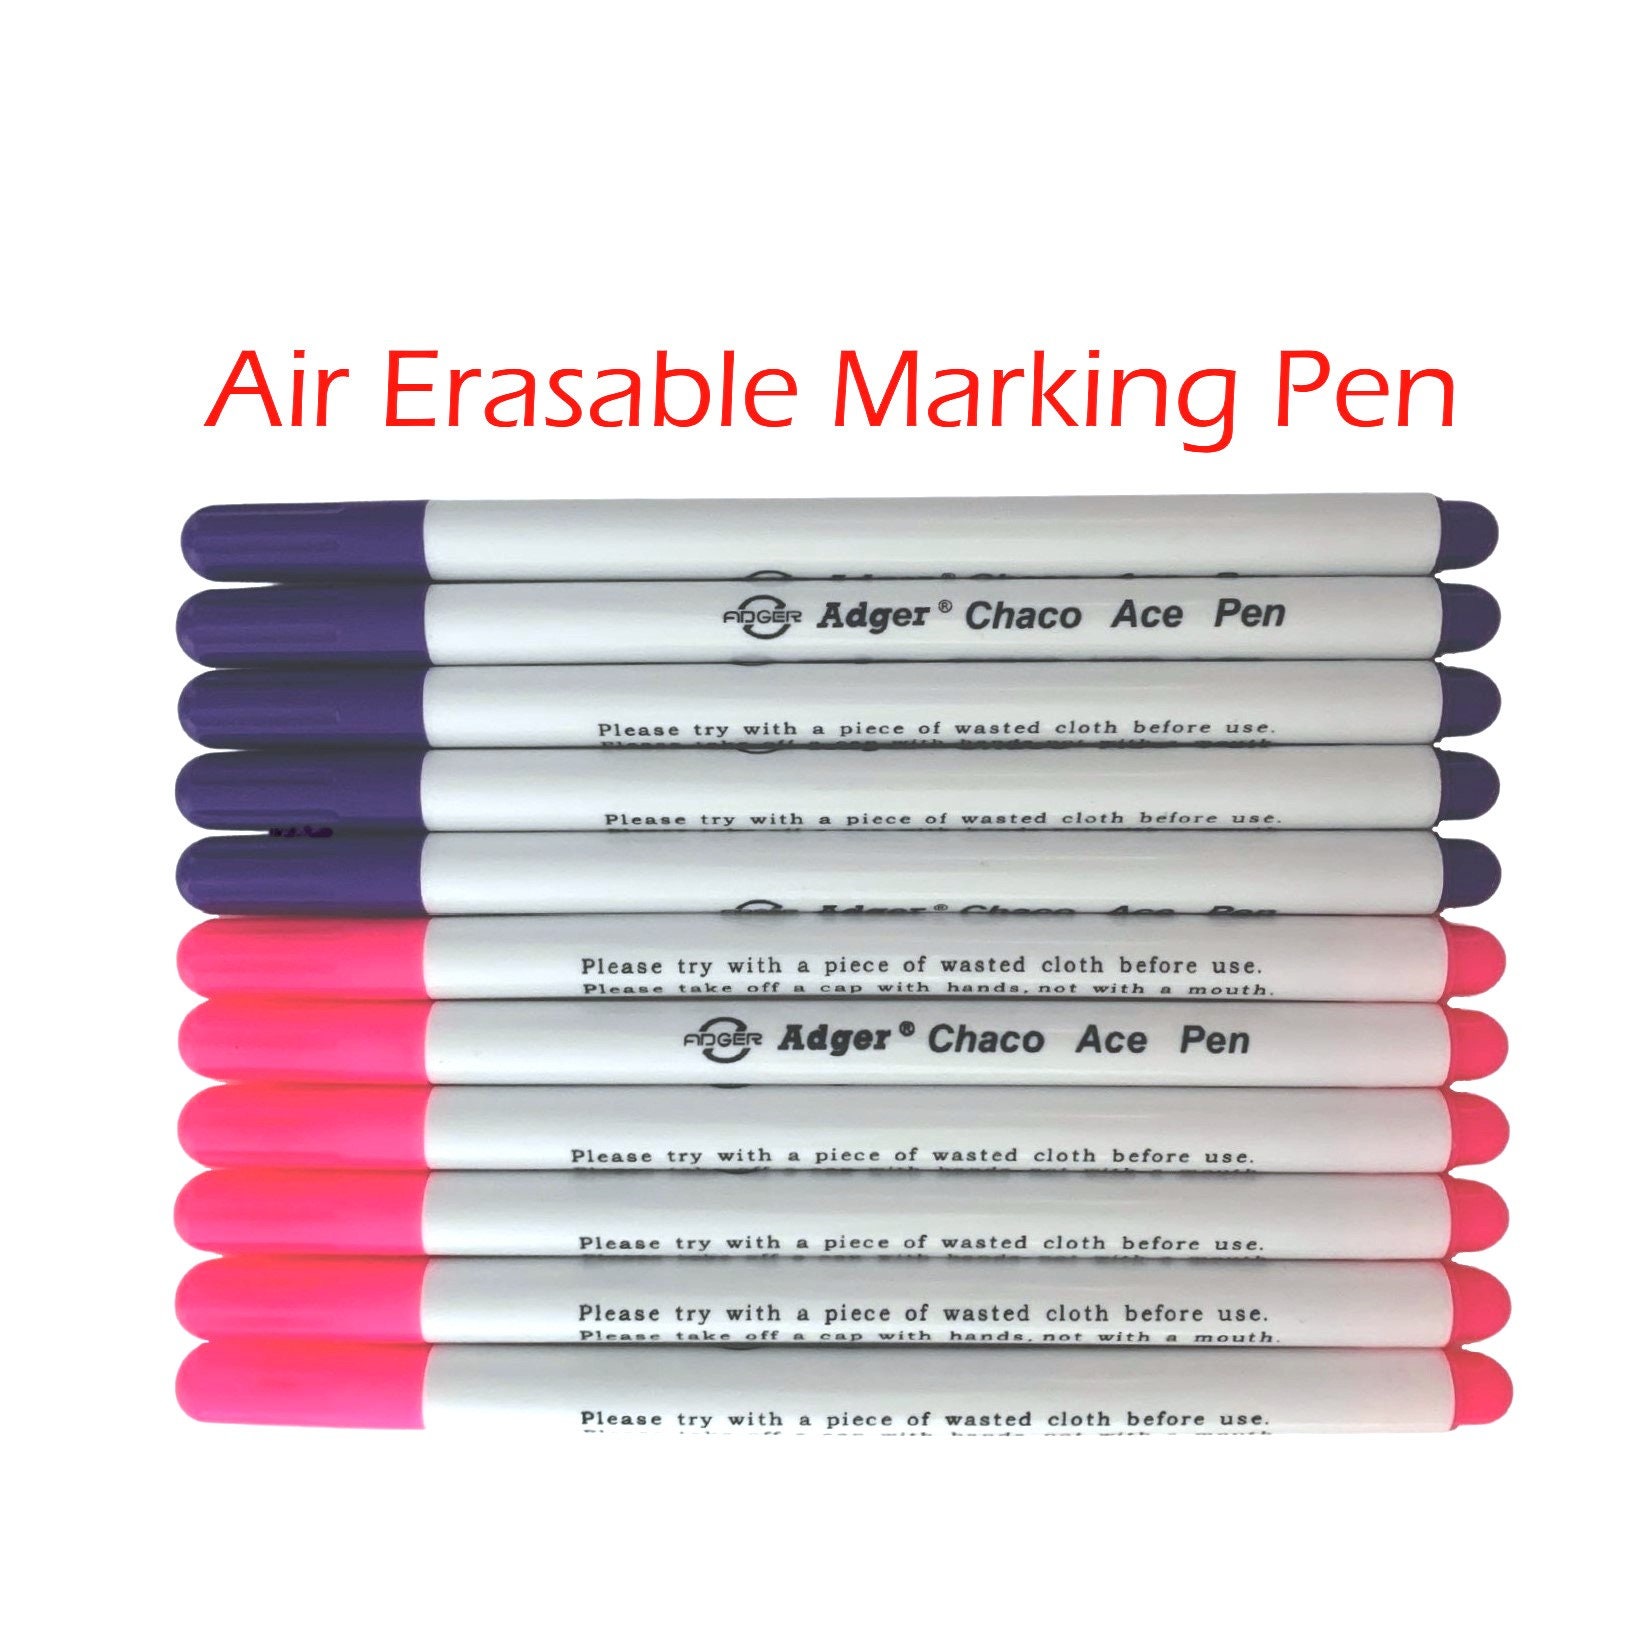 Disappearing Ink Pen // Craft Supplies, Pattern Marker, Benzie Design,  Tracing Pen, Embroidery, Stitching, Marking Pen 